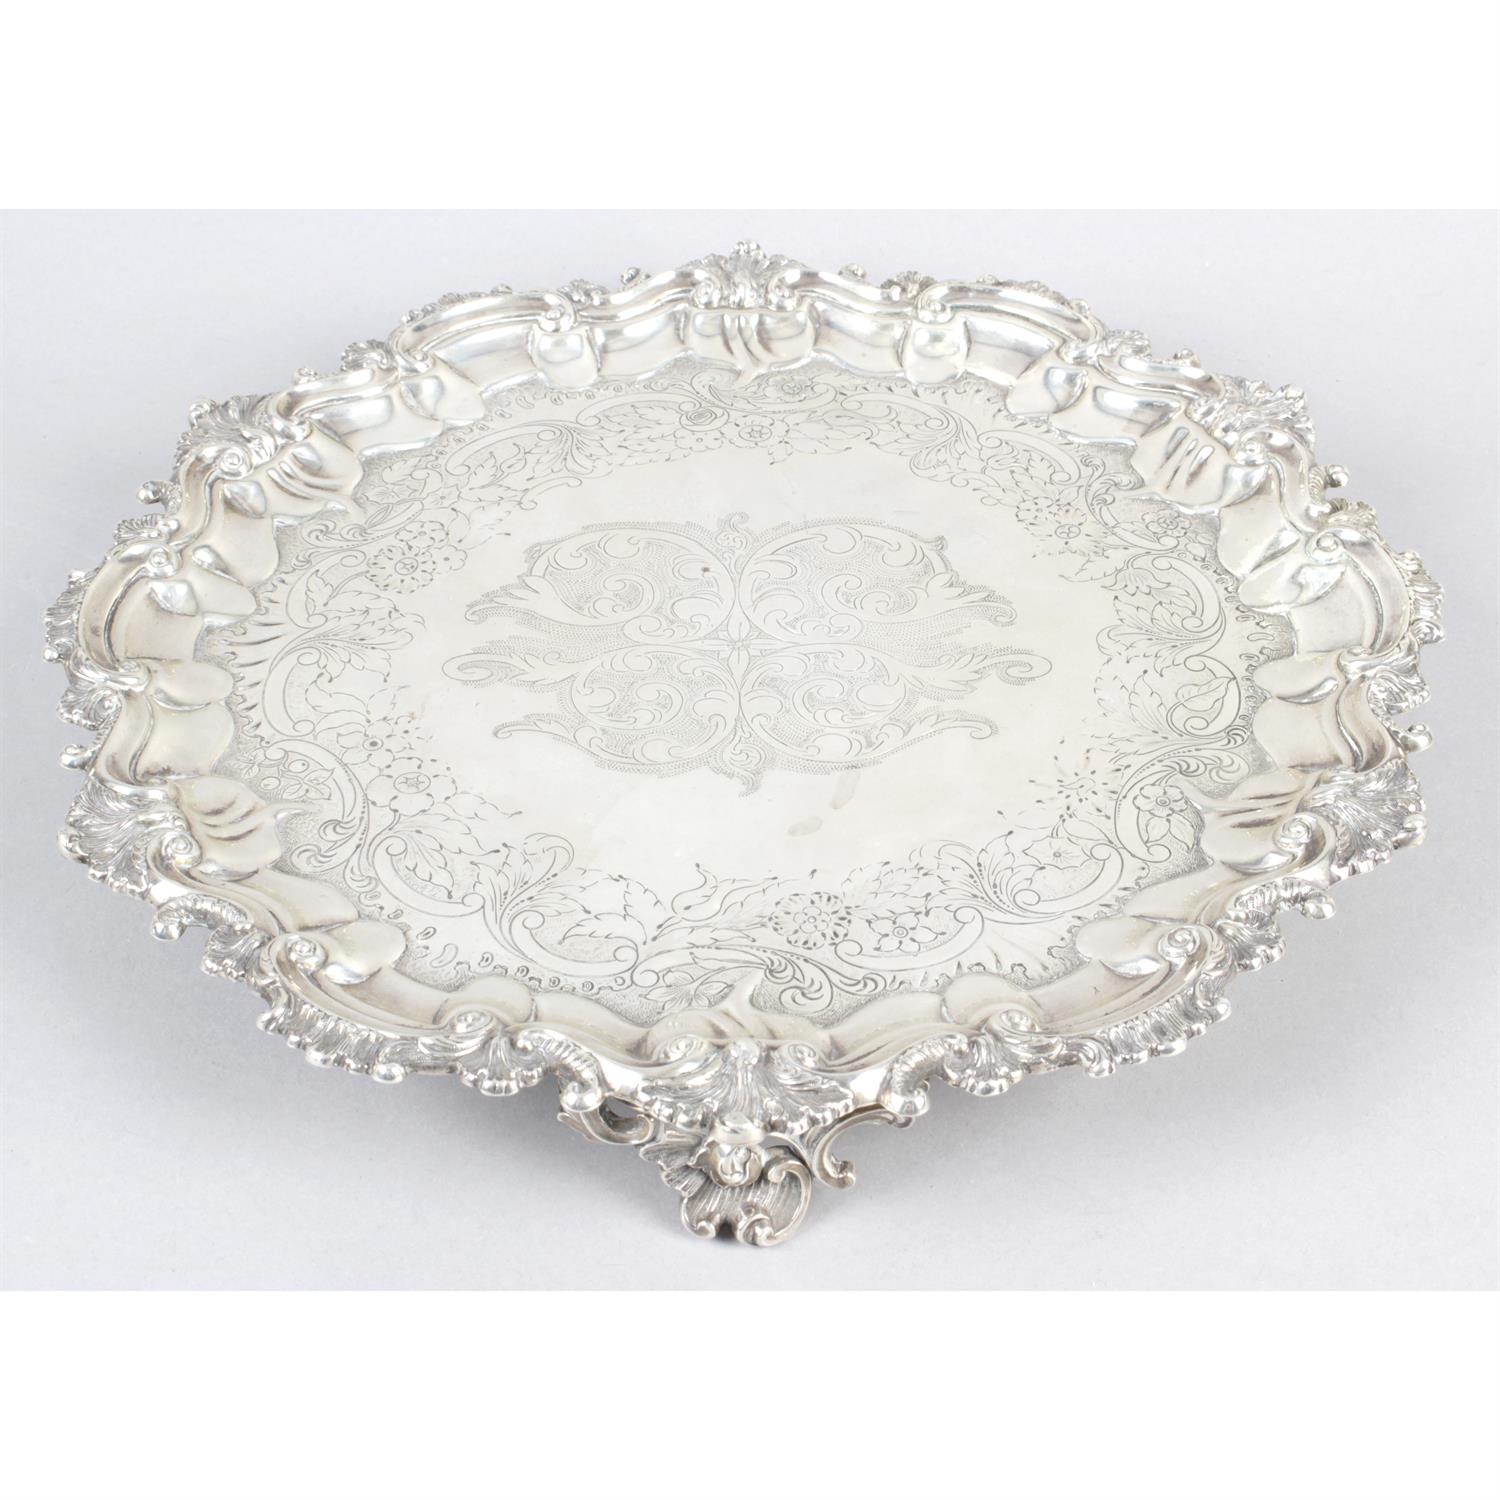 A William IV silver salver with scrolled border.